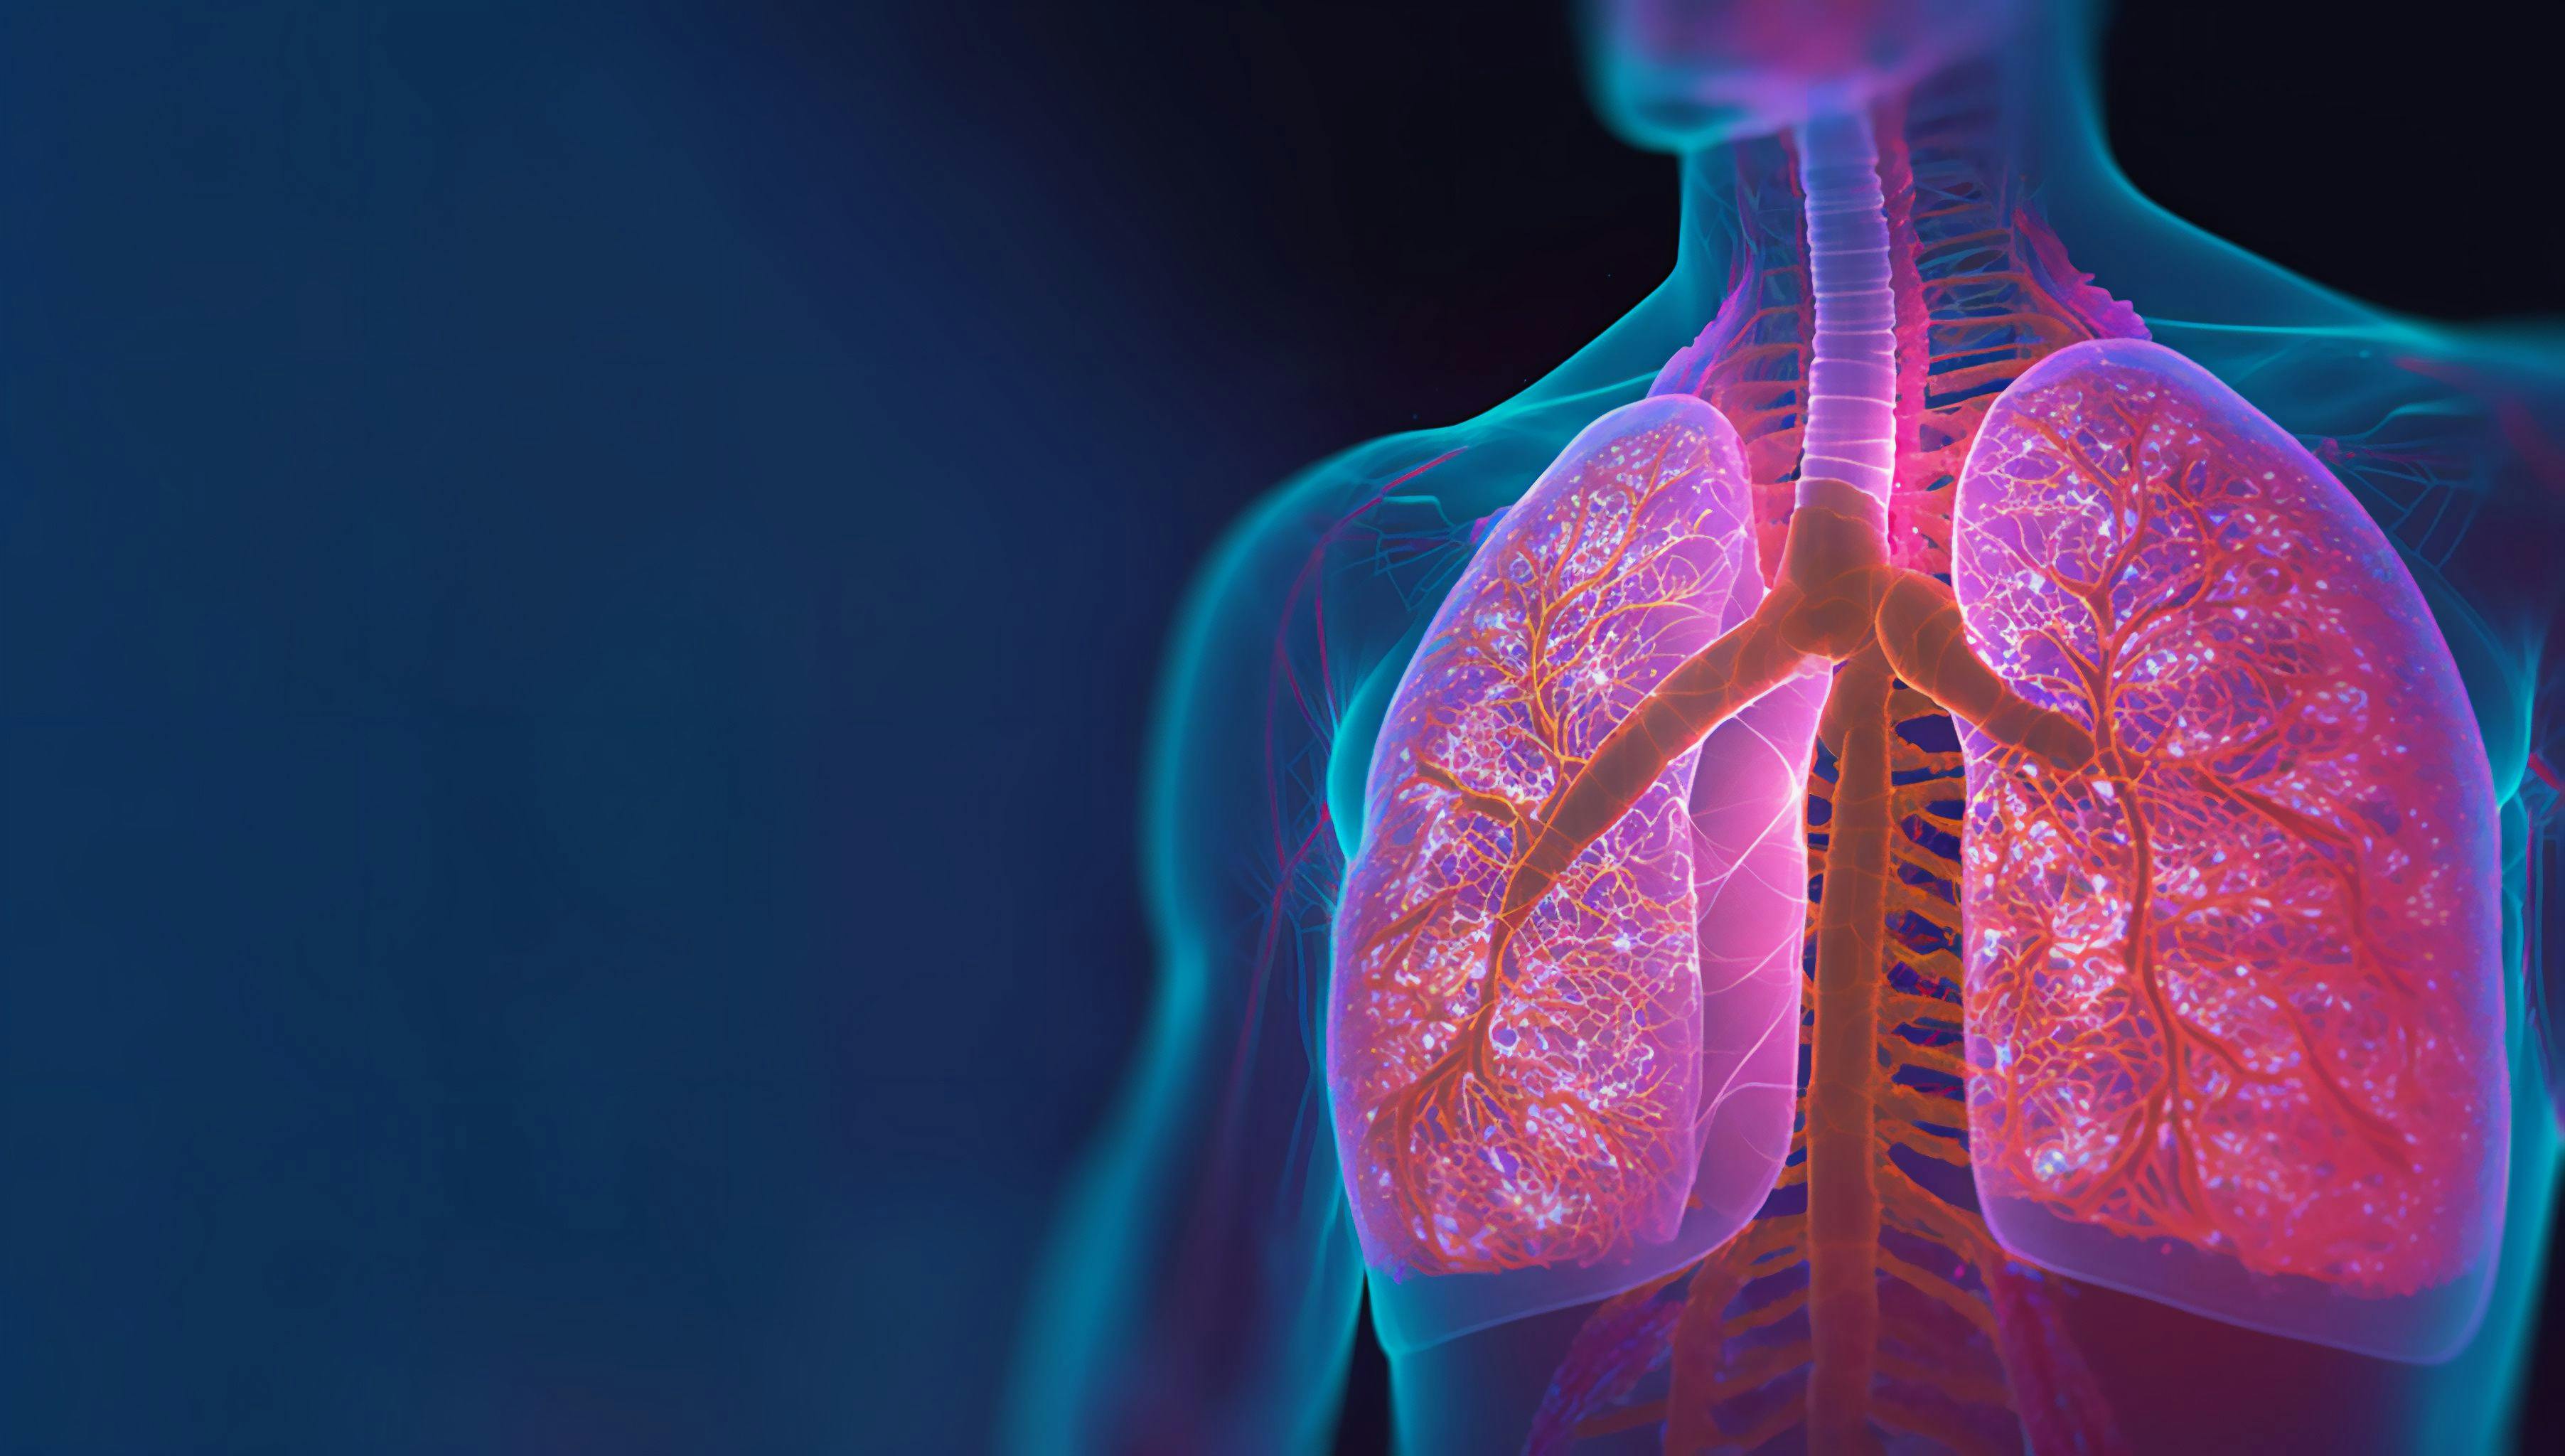 Holographic concept of lung cancer display, lung disease: © catalin - stock.adobe.com